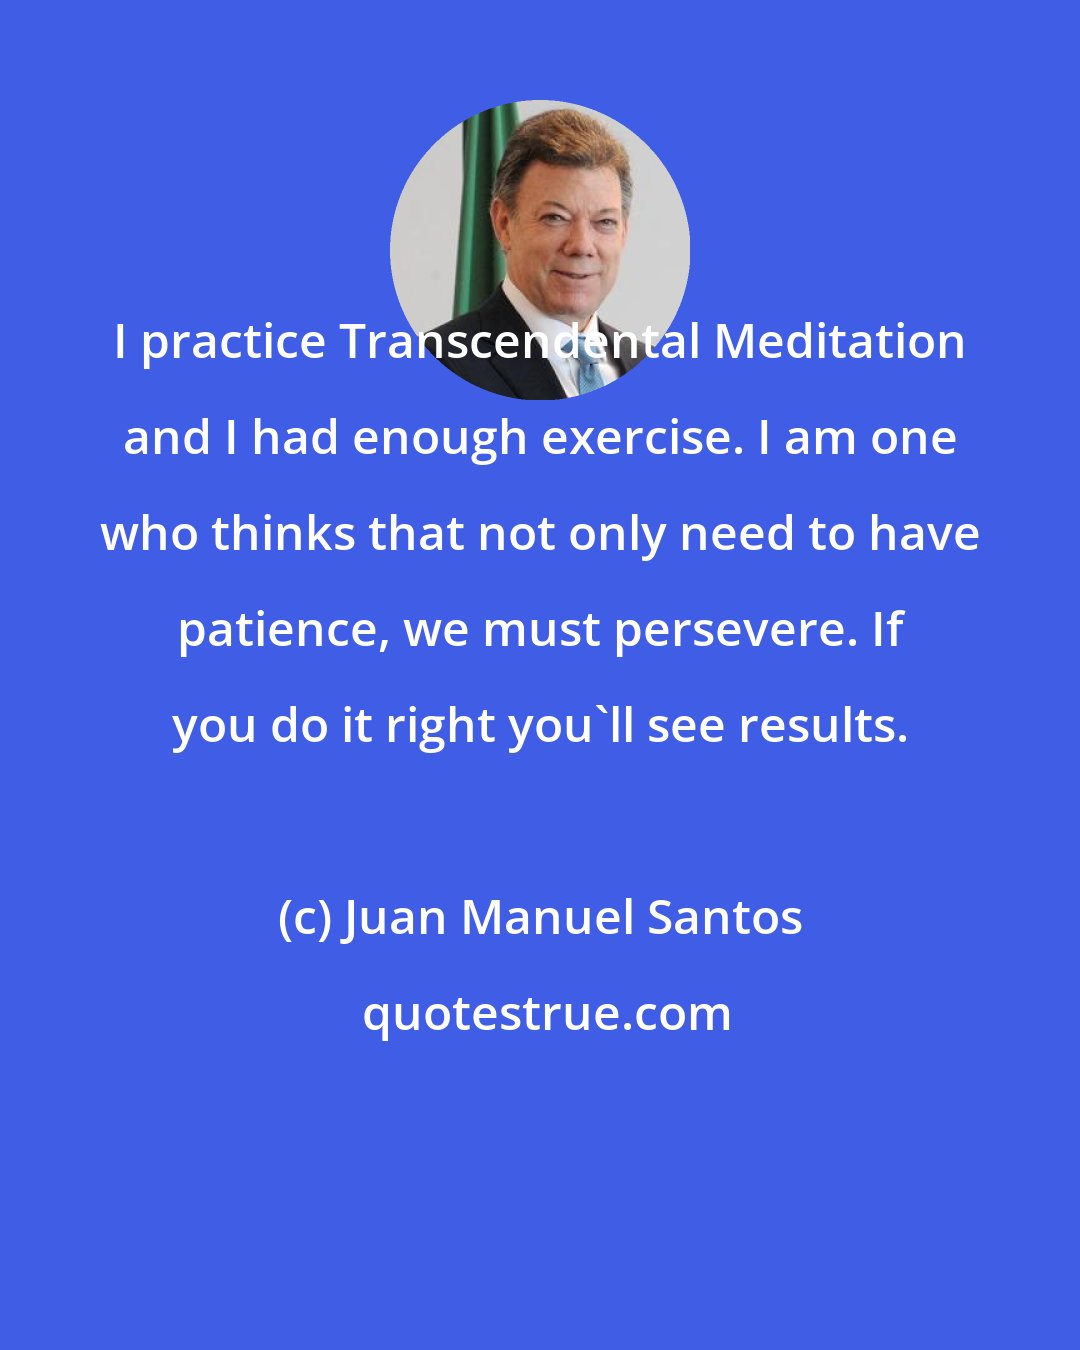 Juan Manuel Santos: I practice Transcendental Meditation and I had enough exercise. I am one who thinks that not only need to have patience, we must persevere. If you do it right you'll see results.